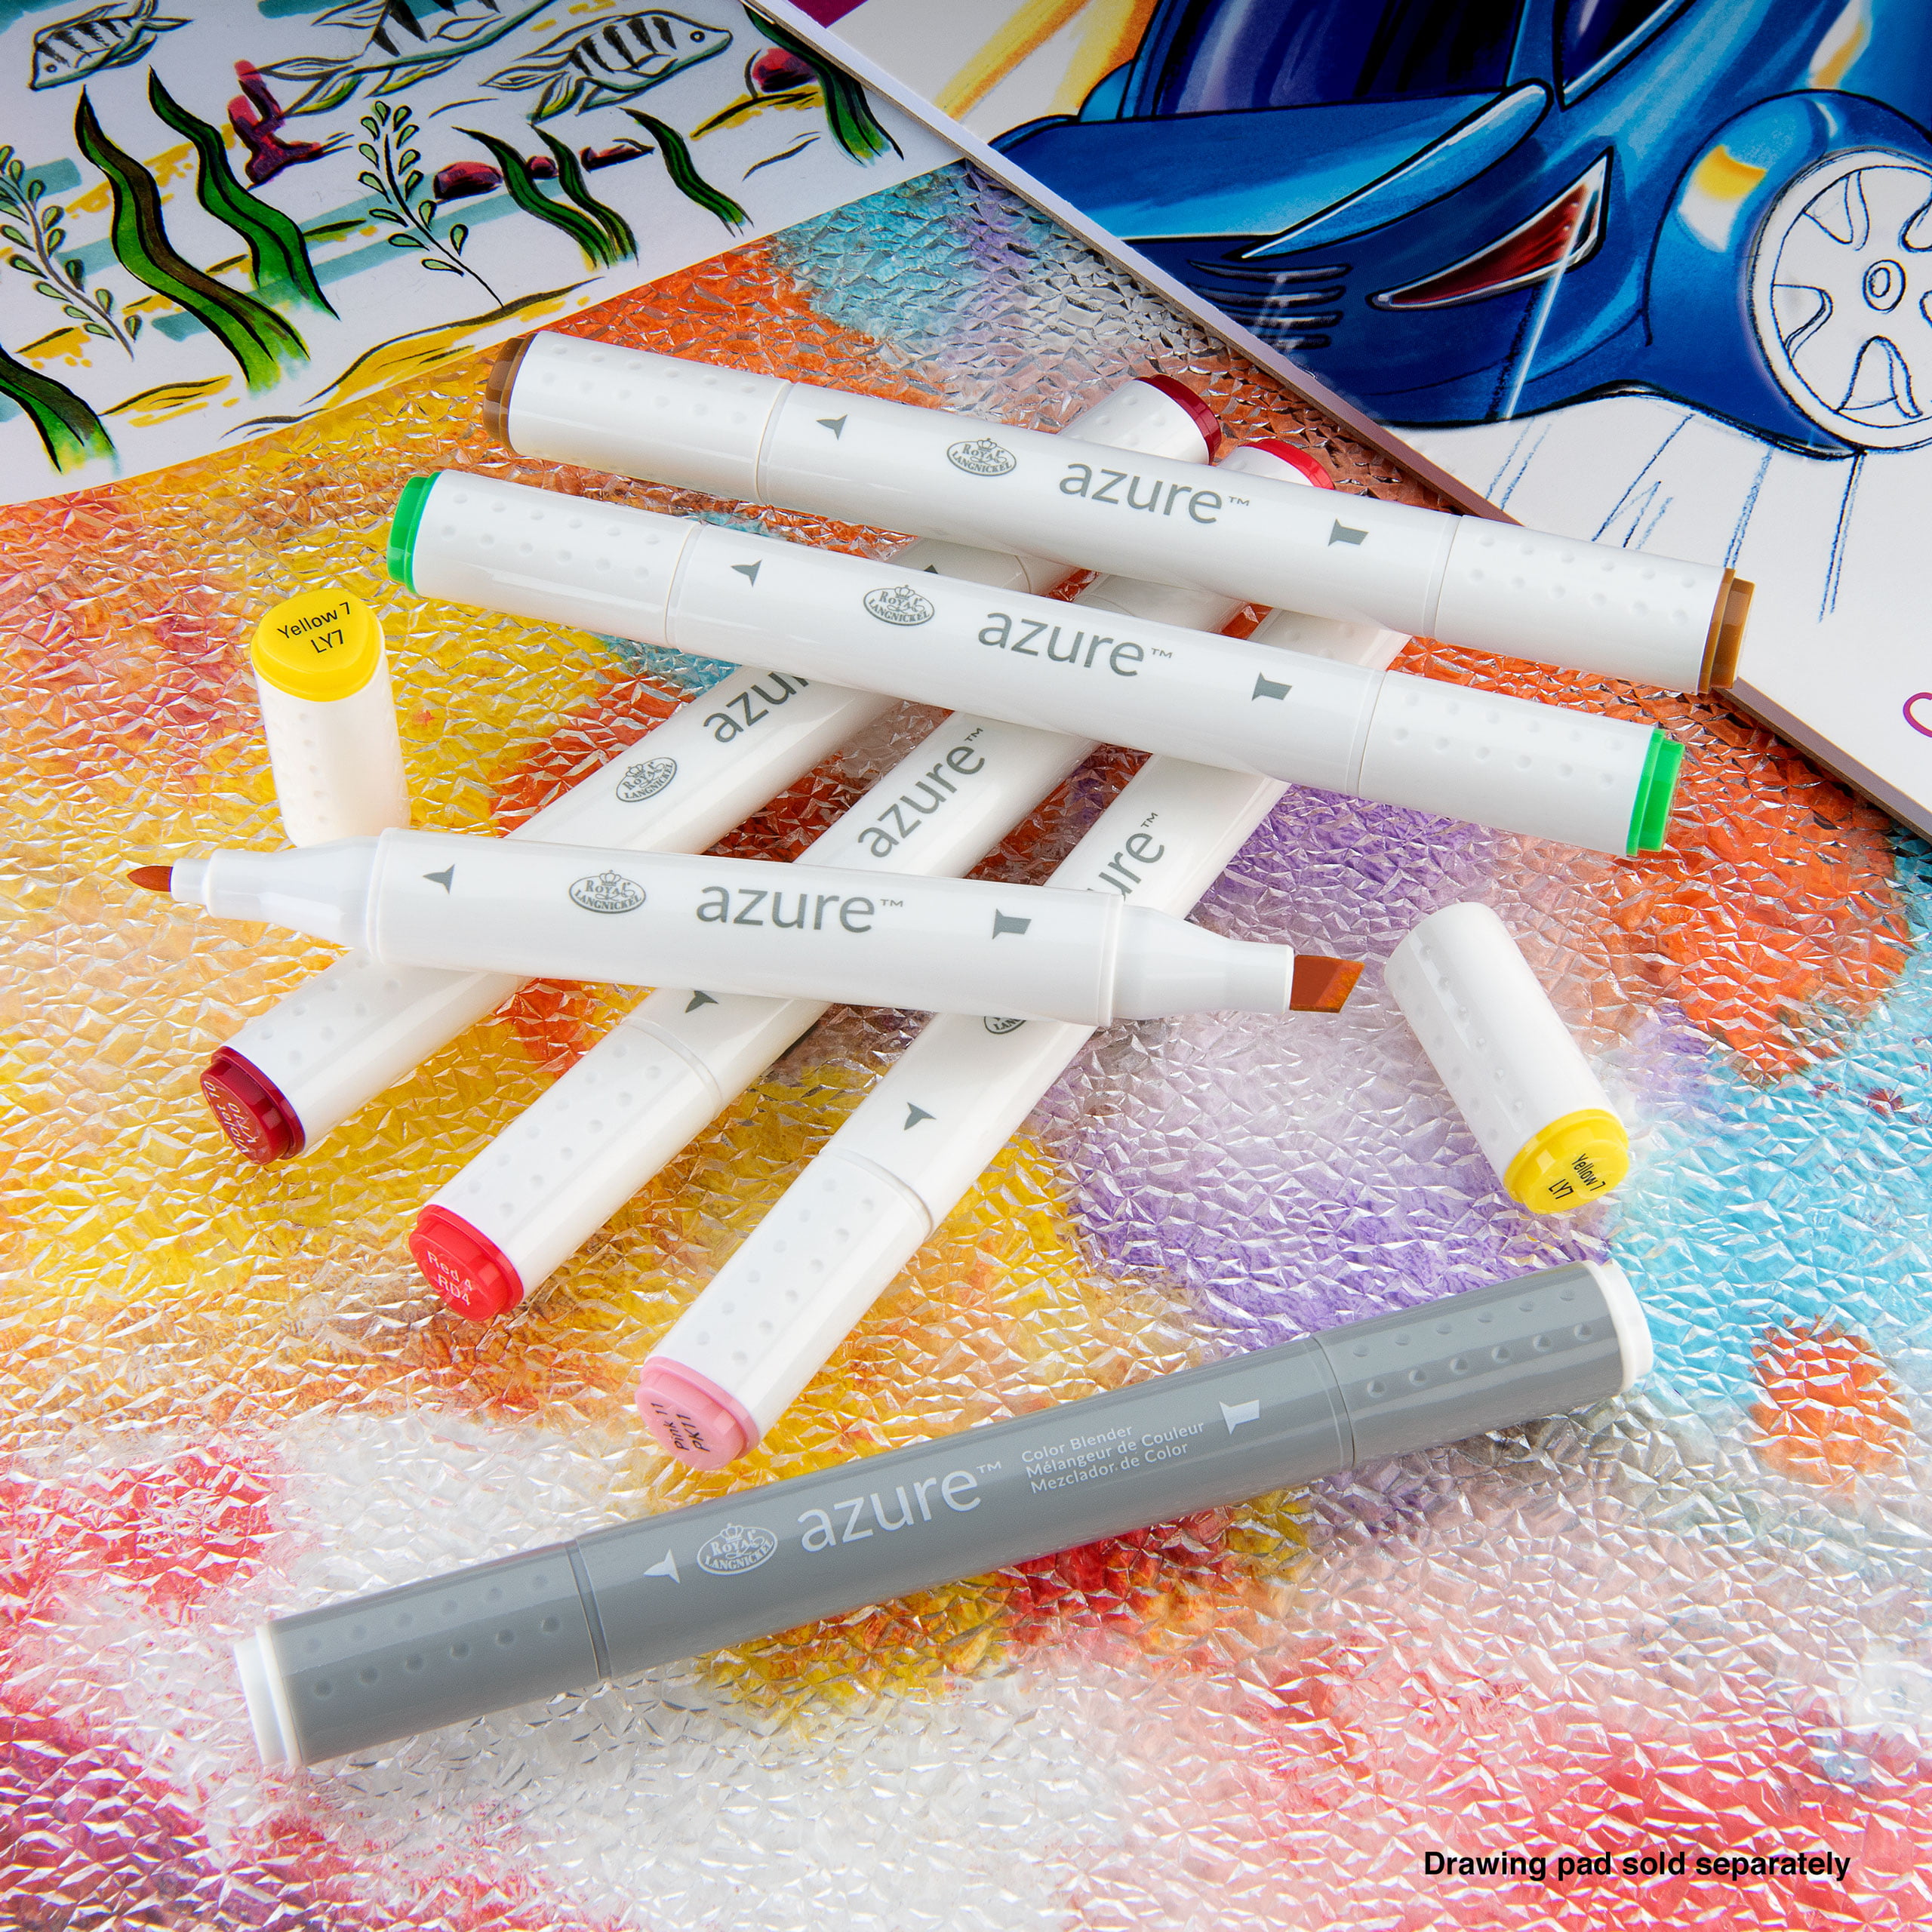 Royal & Langnickel Azure, 7Pc Dual-Tip, Alcohol Based Marker Set, Includes  - 6 Markers & 1 Blender, Grayscale Colors - Imported Products from USA -  iBhejo